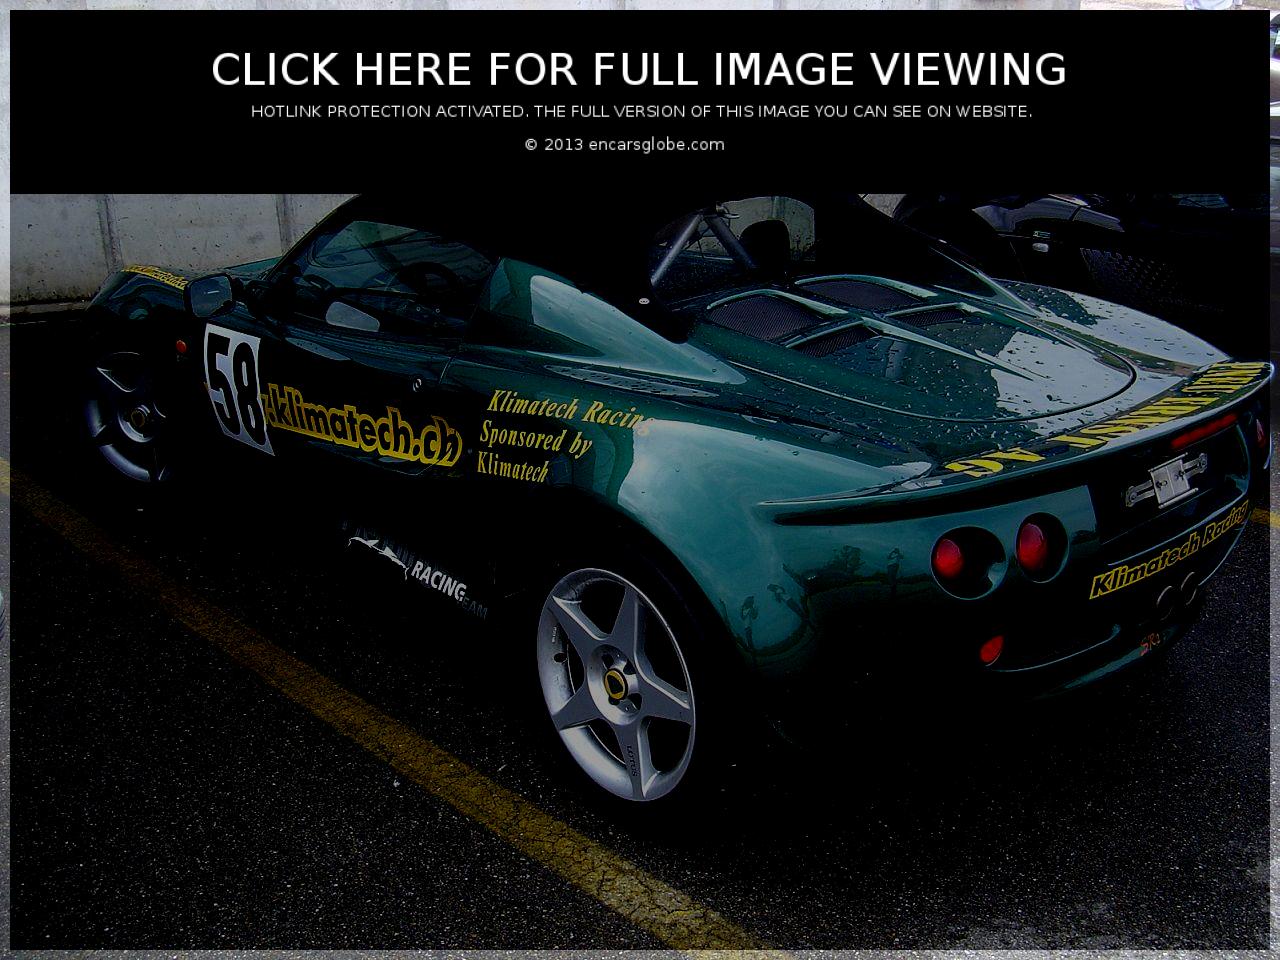 Lotus Elise SR2 Photo Gallery: Photo #11 out of 9, Image Size ...